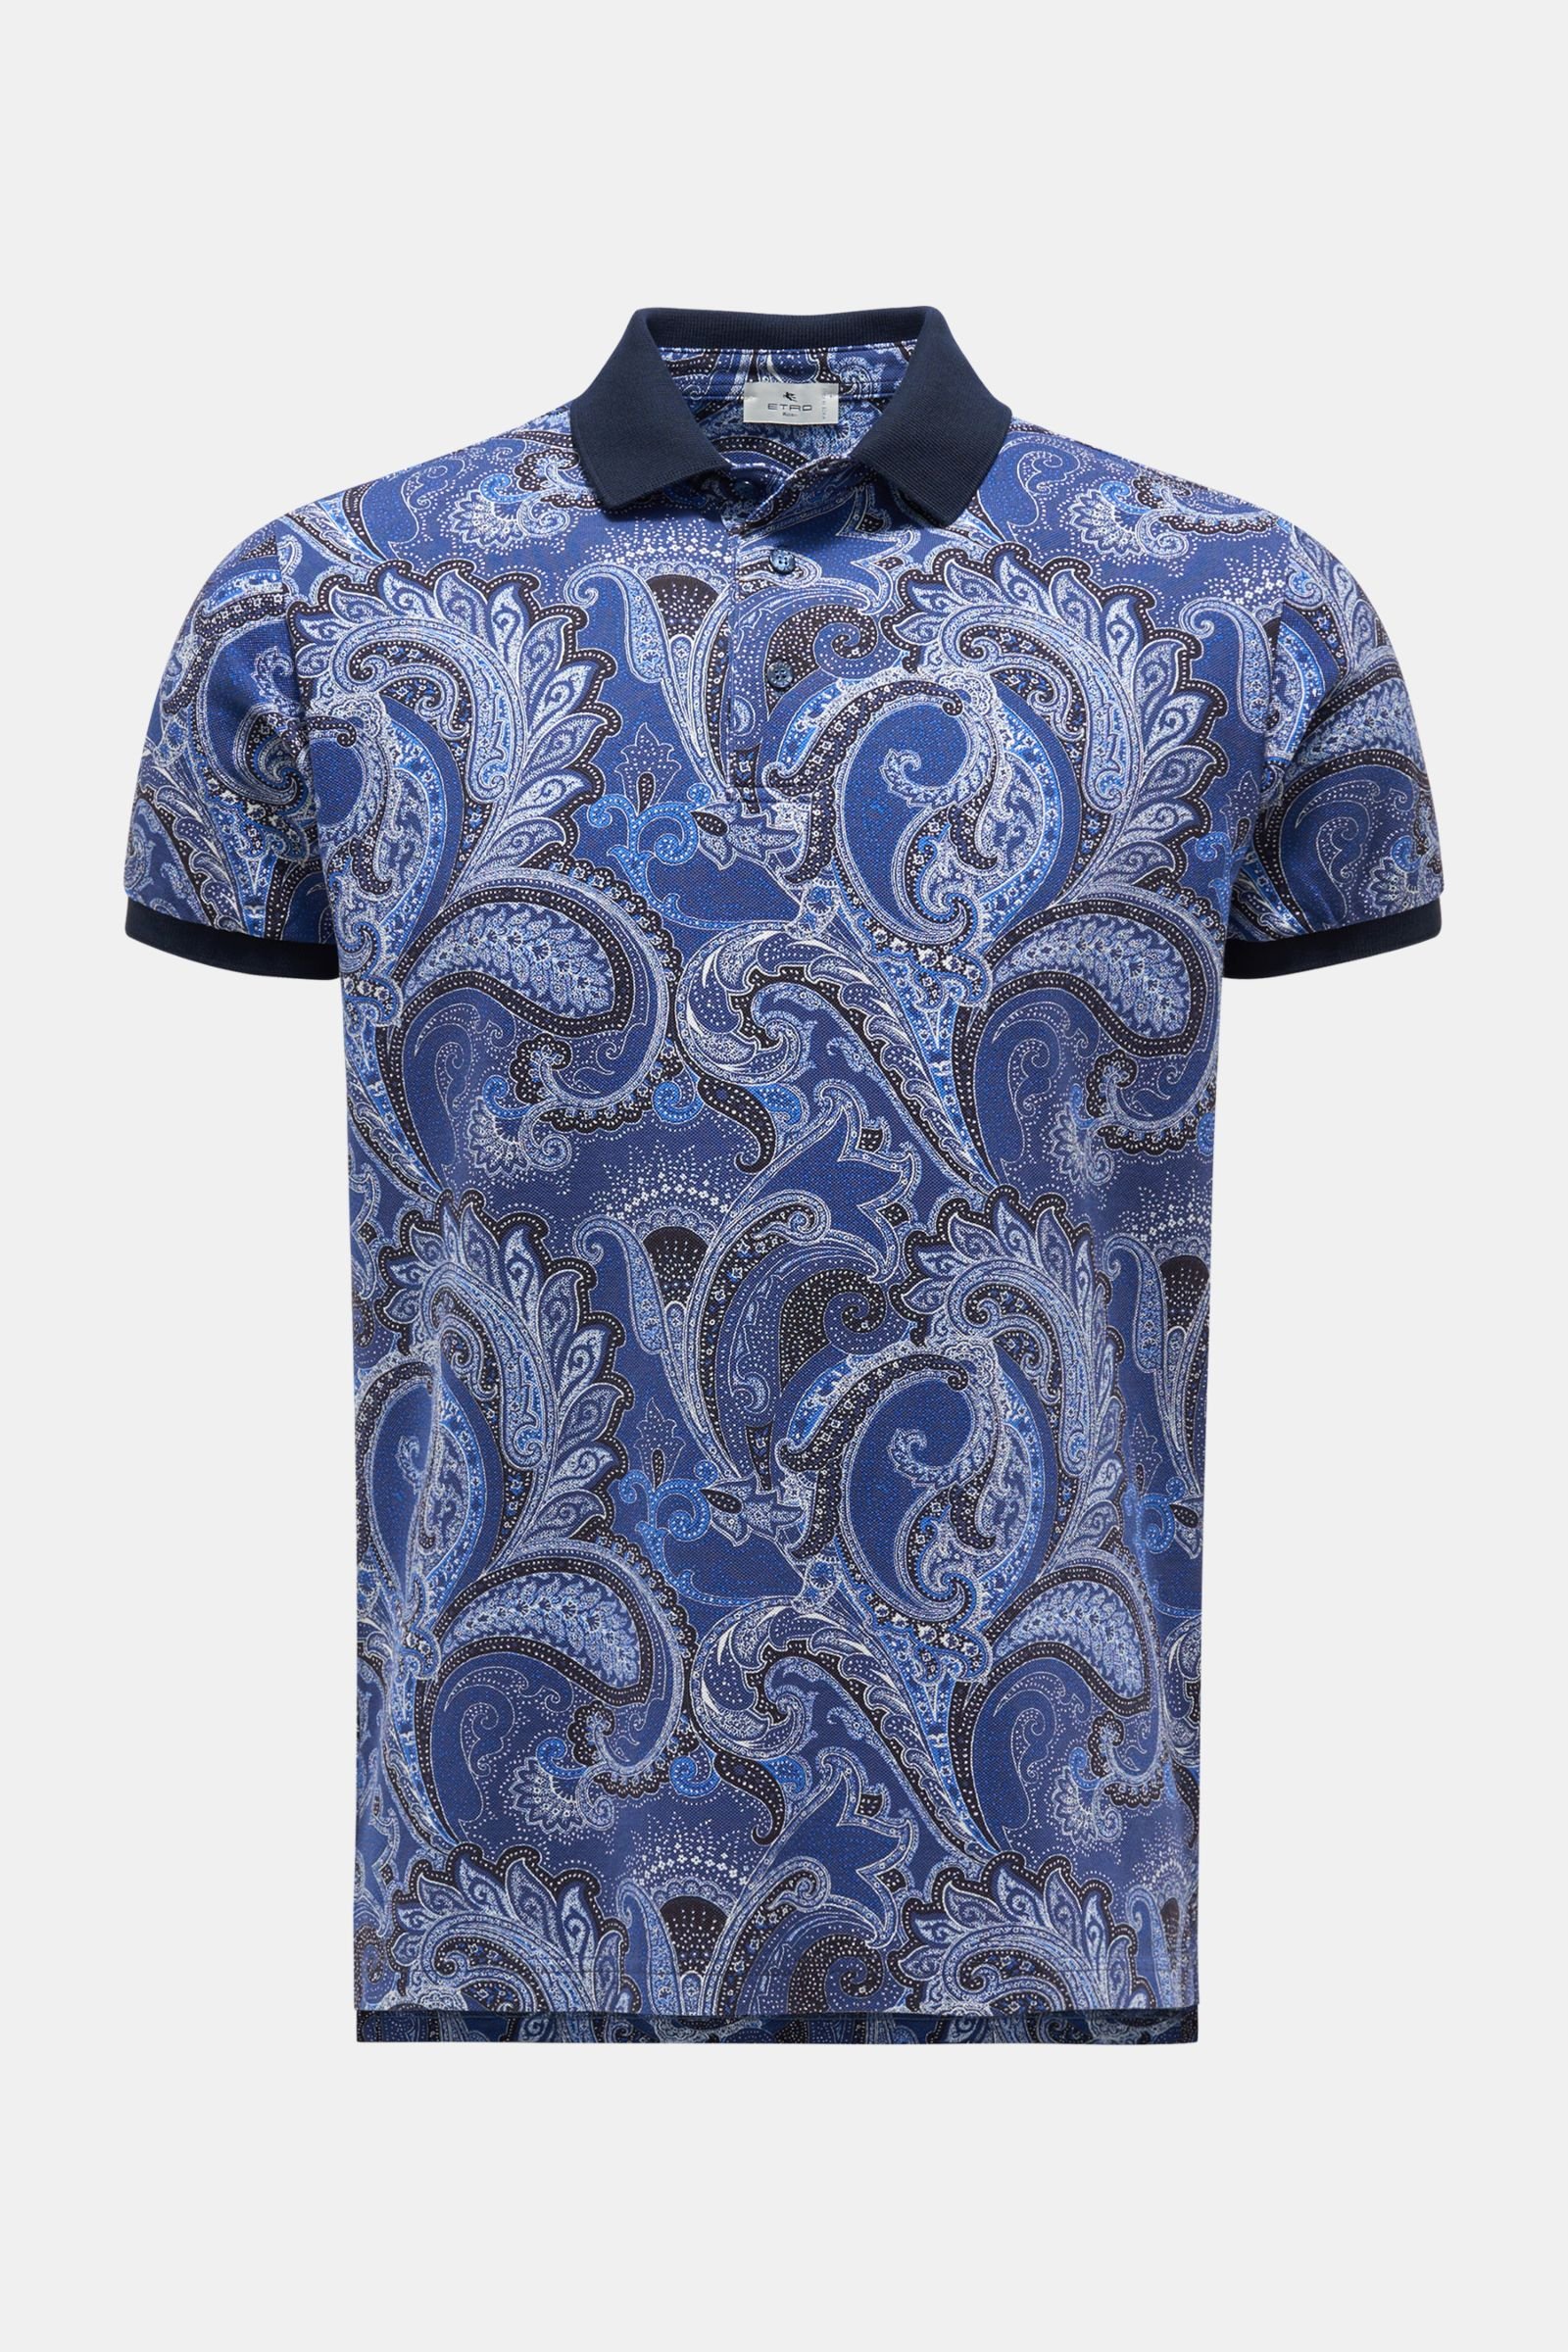 Polo shirt grey-blue/navy patterned